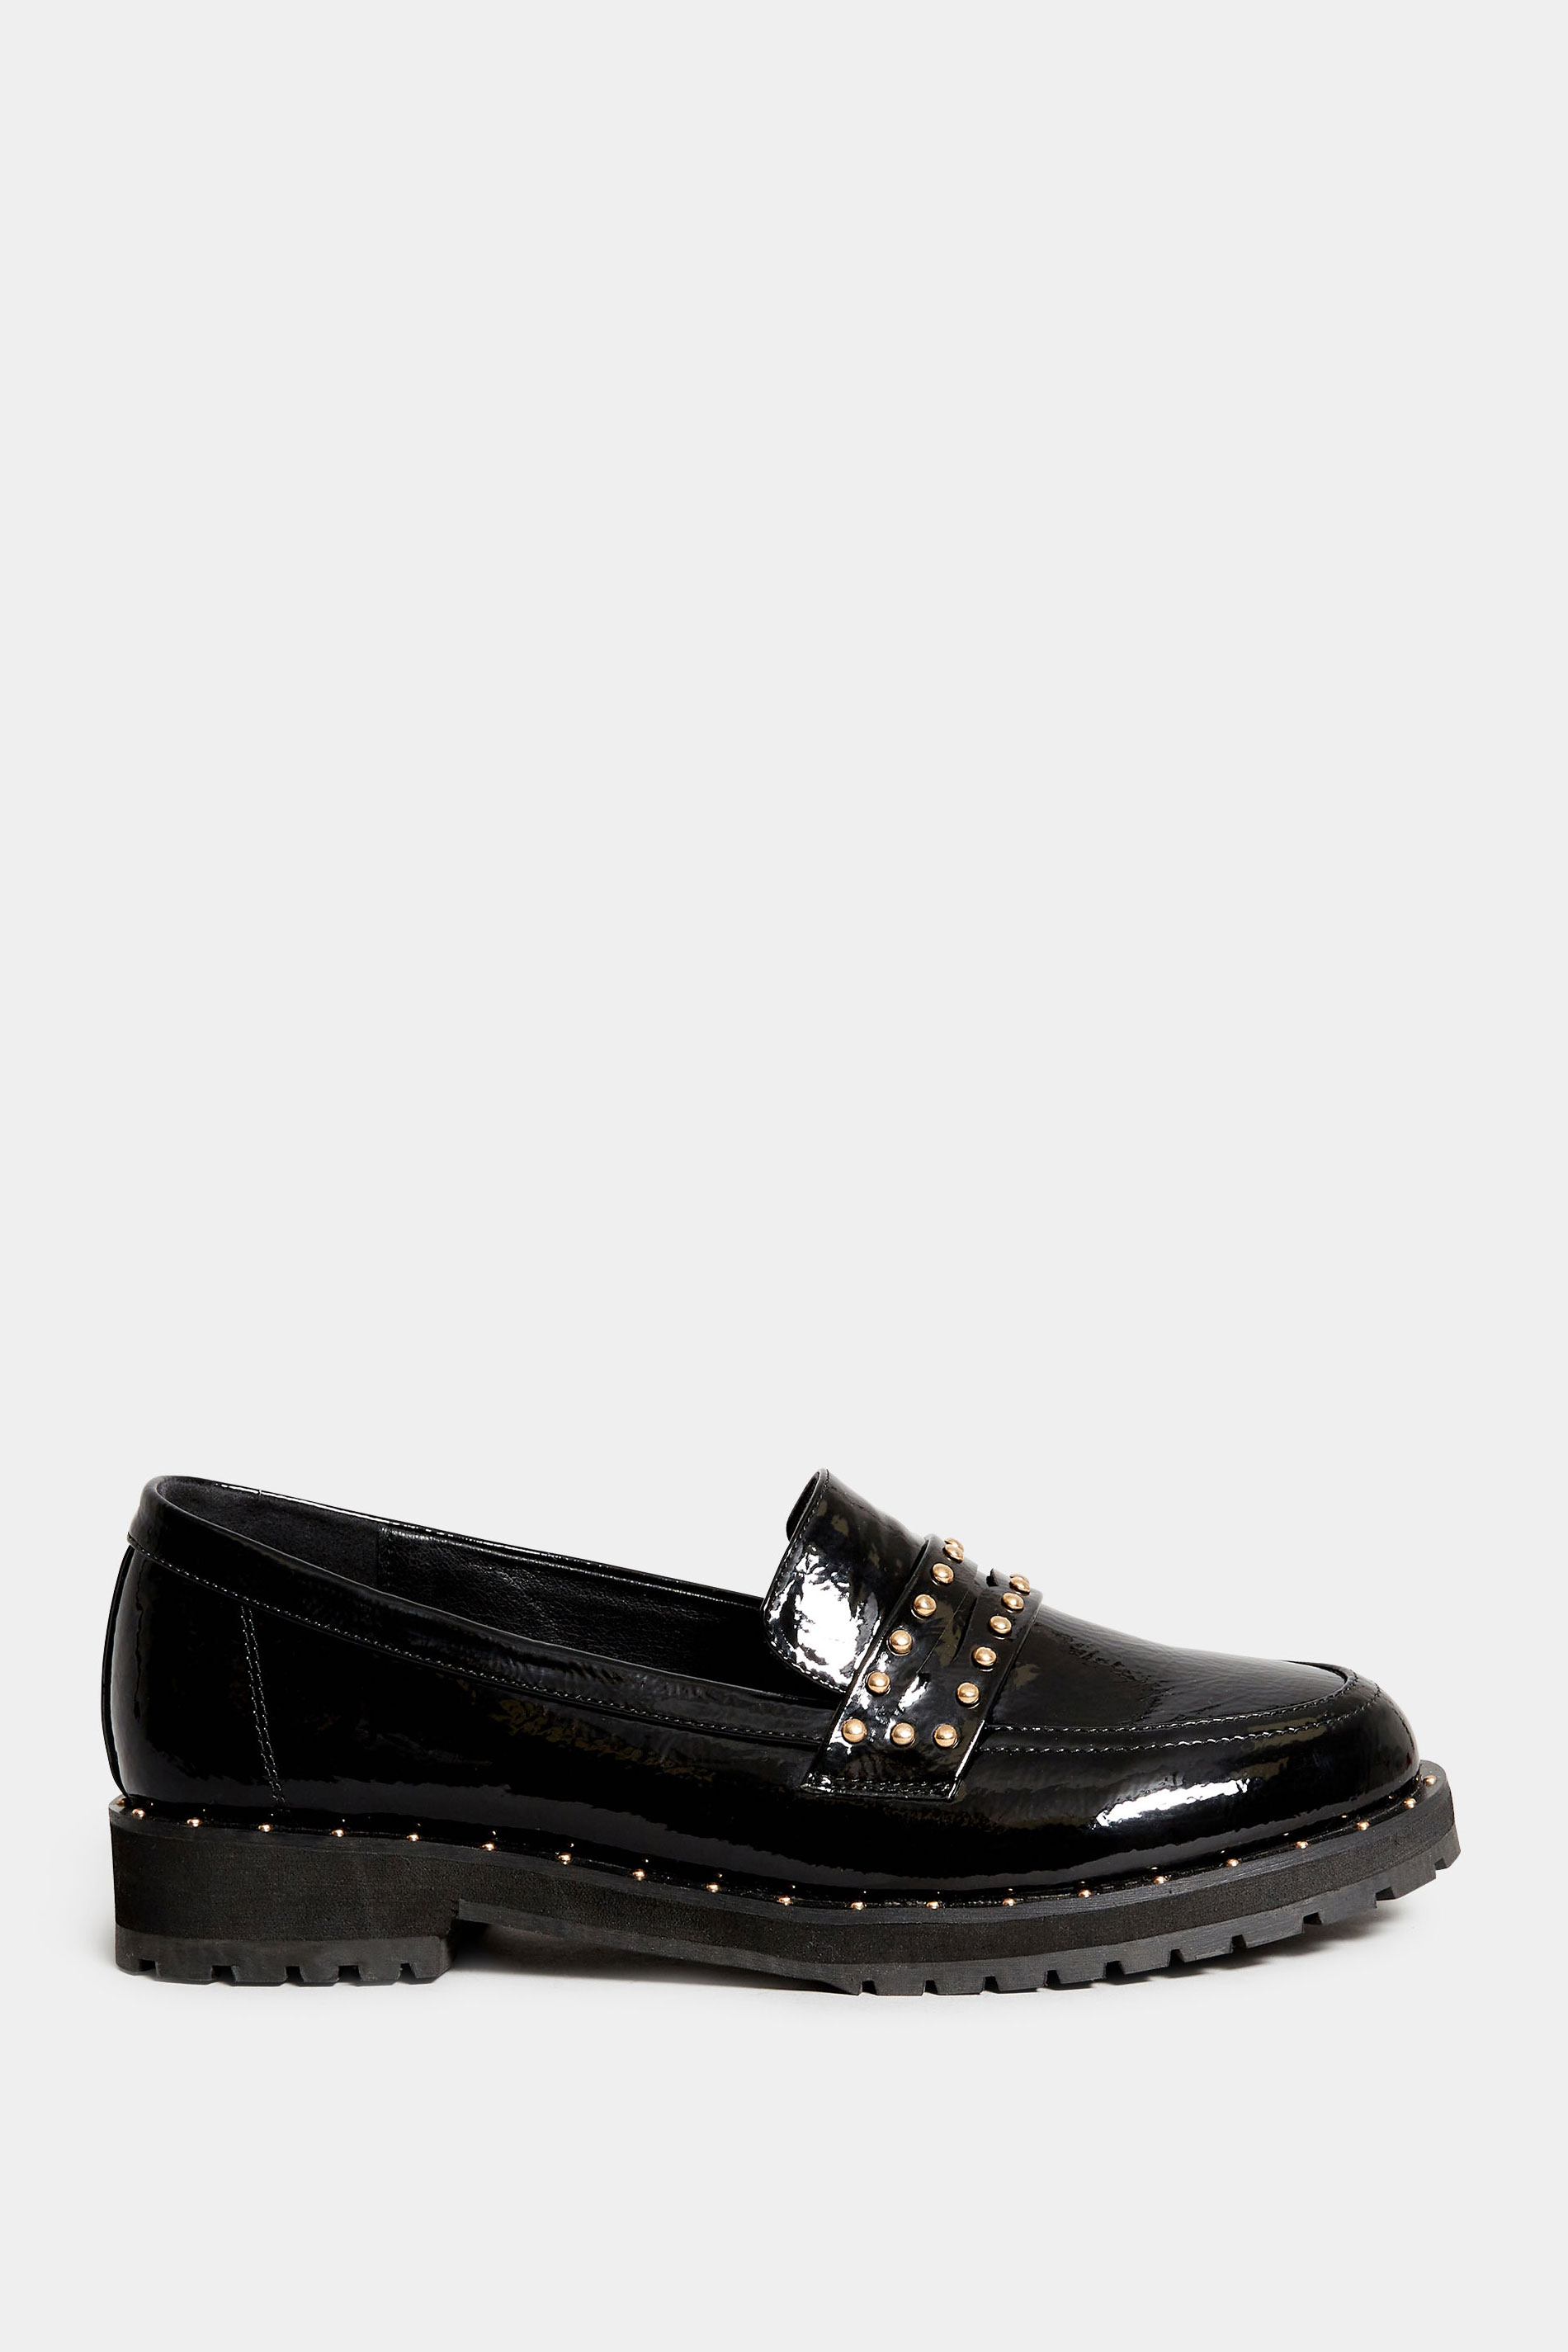 LTS Black Patent Studded Loafers In Standard Fit | Long Tall Sally 3